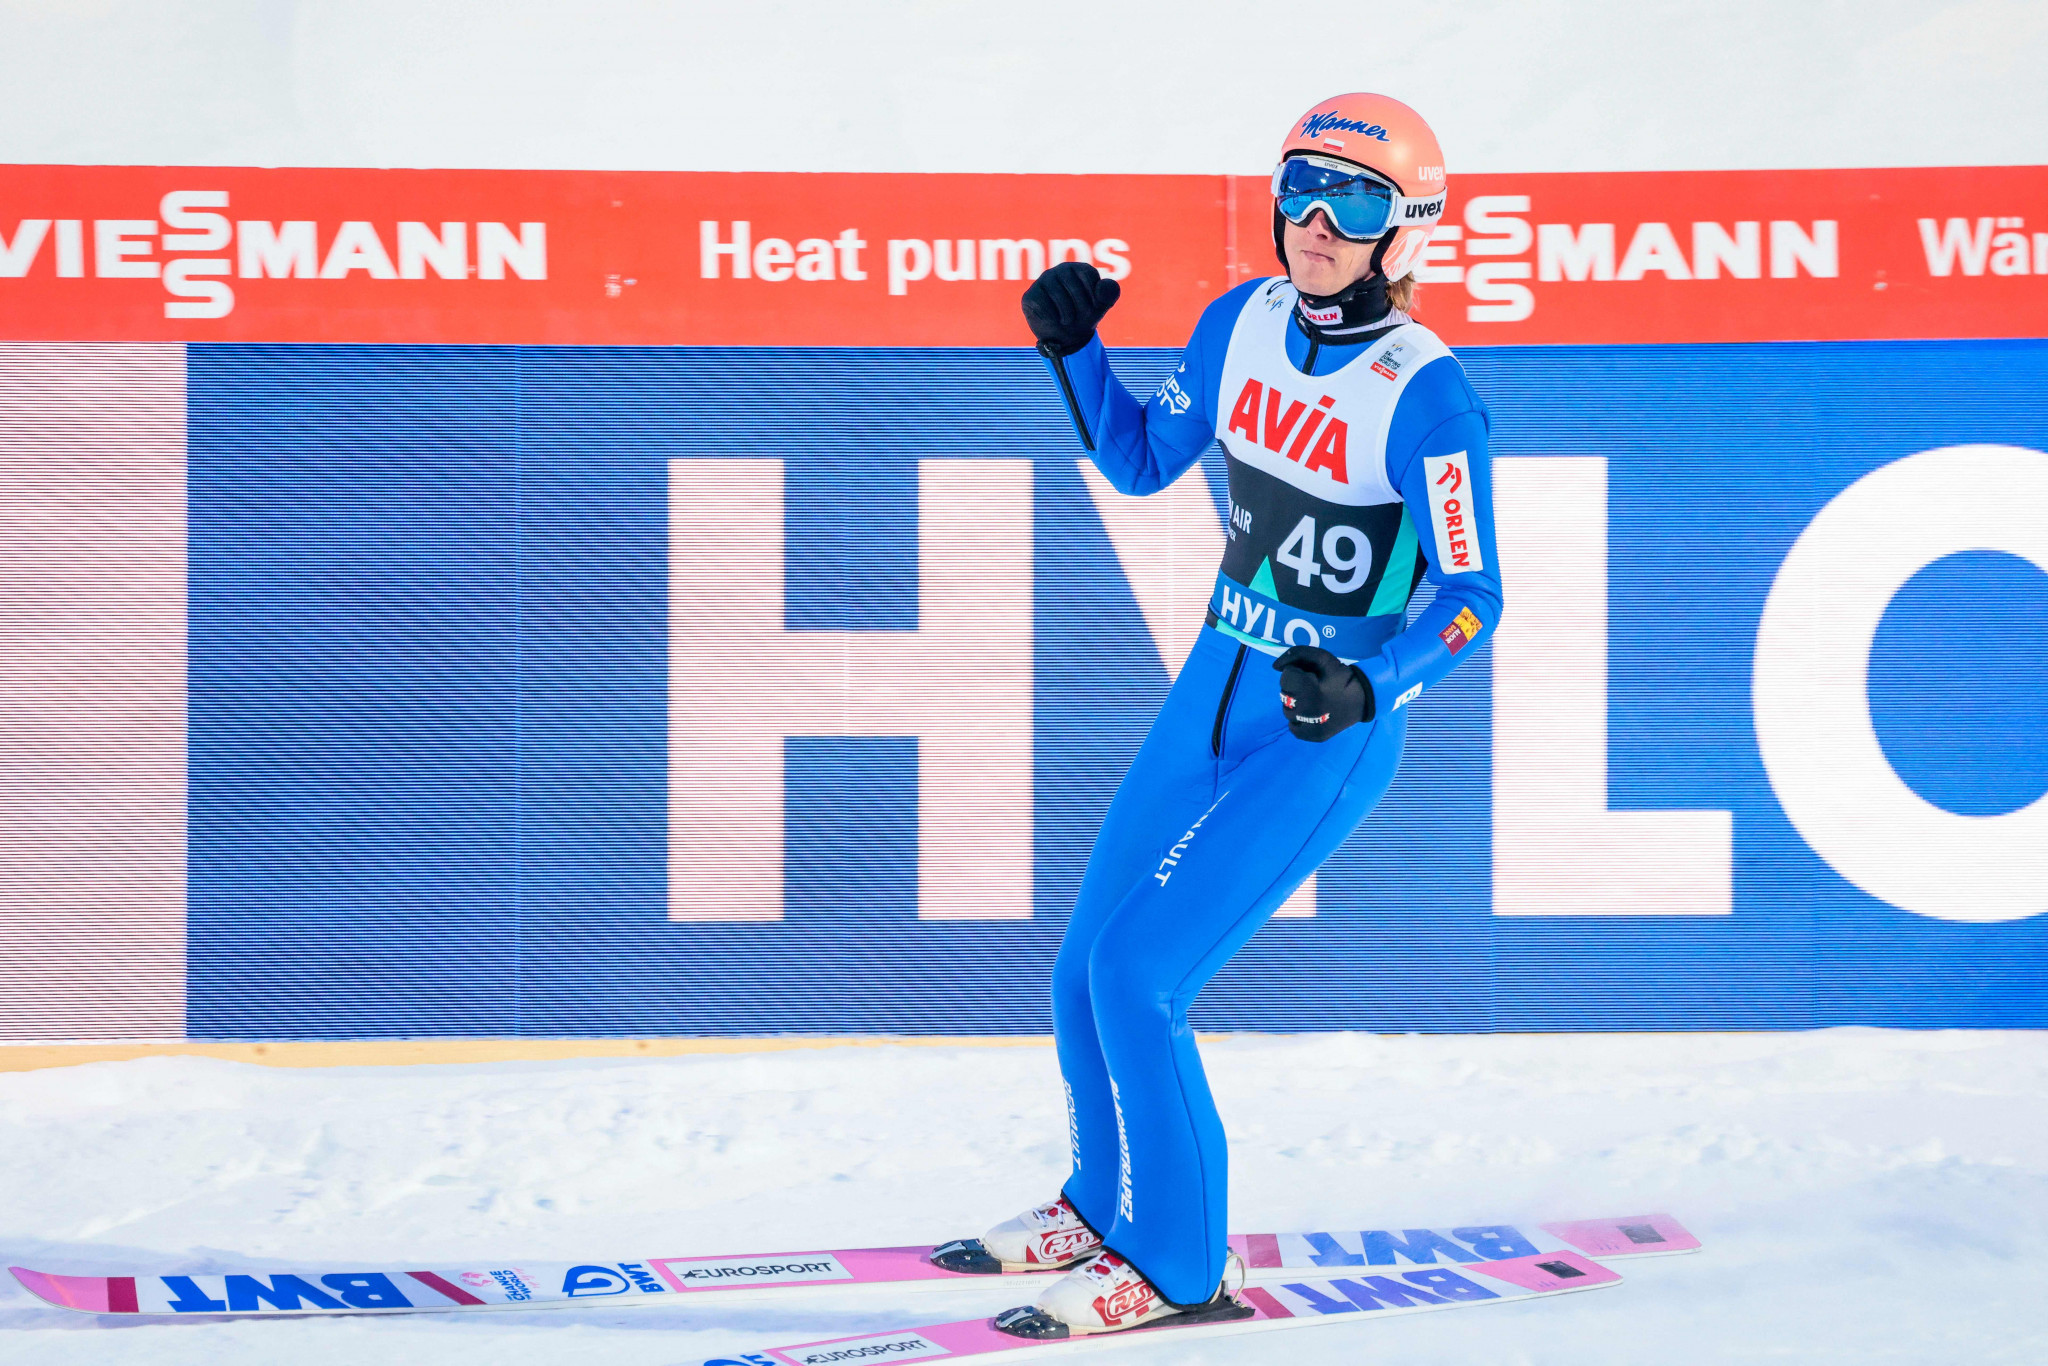 Kubacki closes down Granerud at Ski Jumping World Cup with gold in Lillehammer